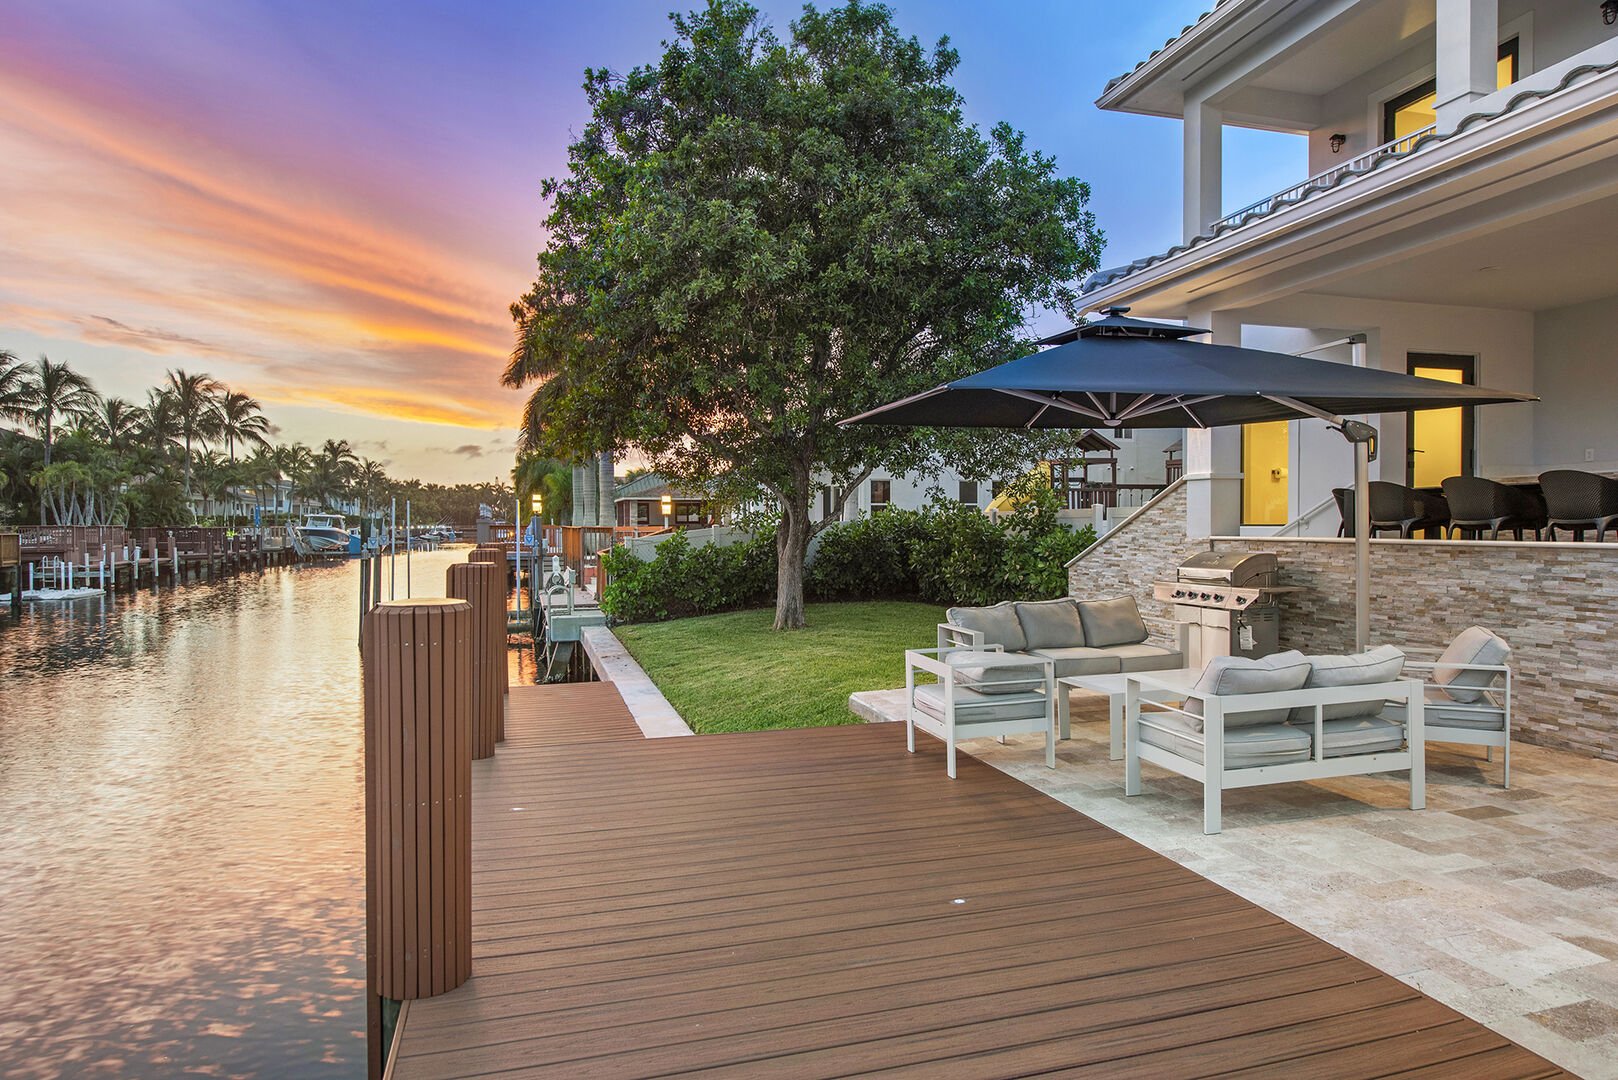 Waterfront tranquility from the backyard and its lounge areas, ideal for entertaining.